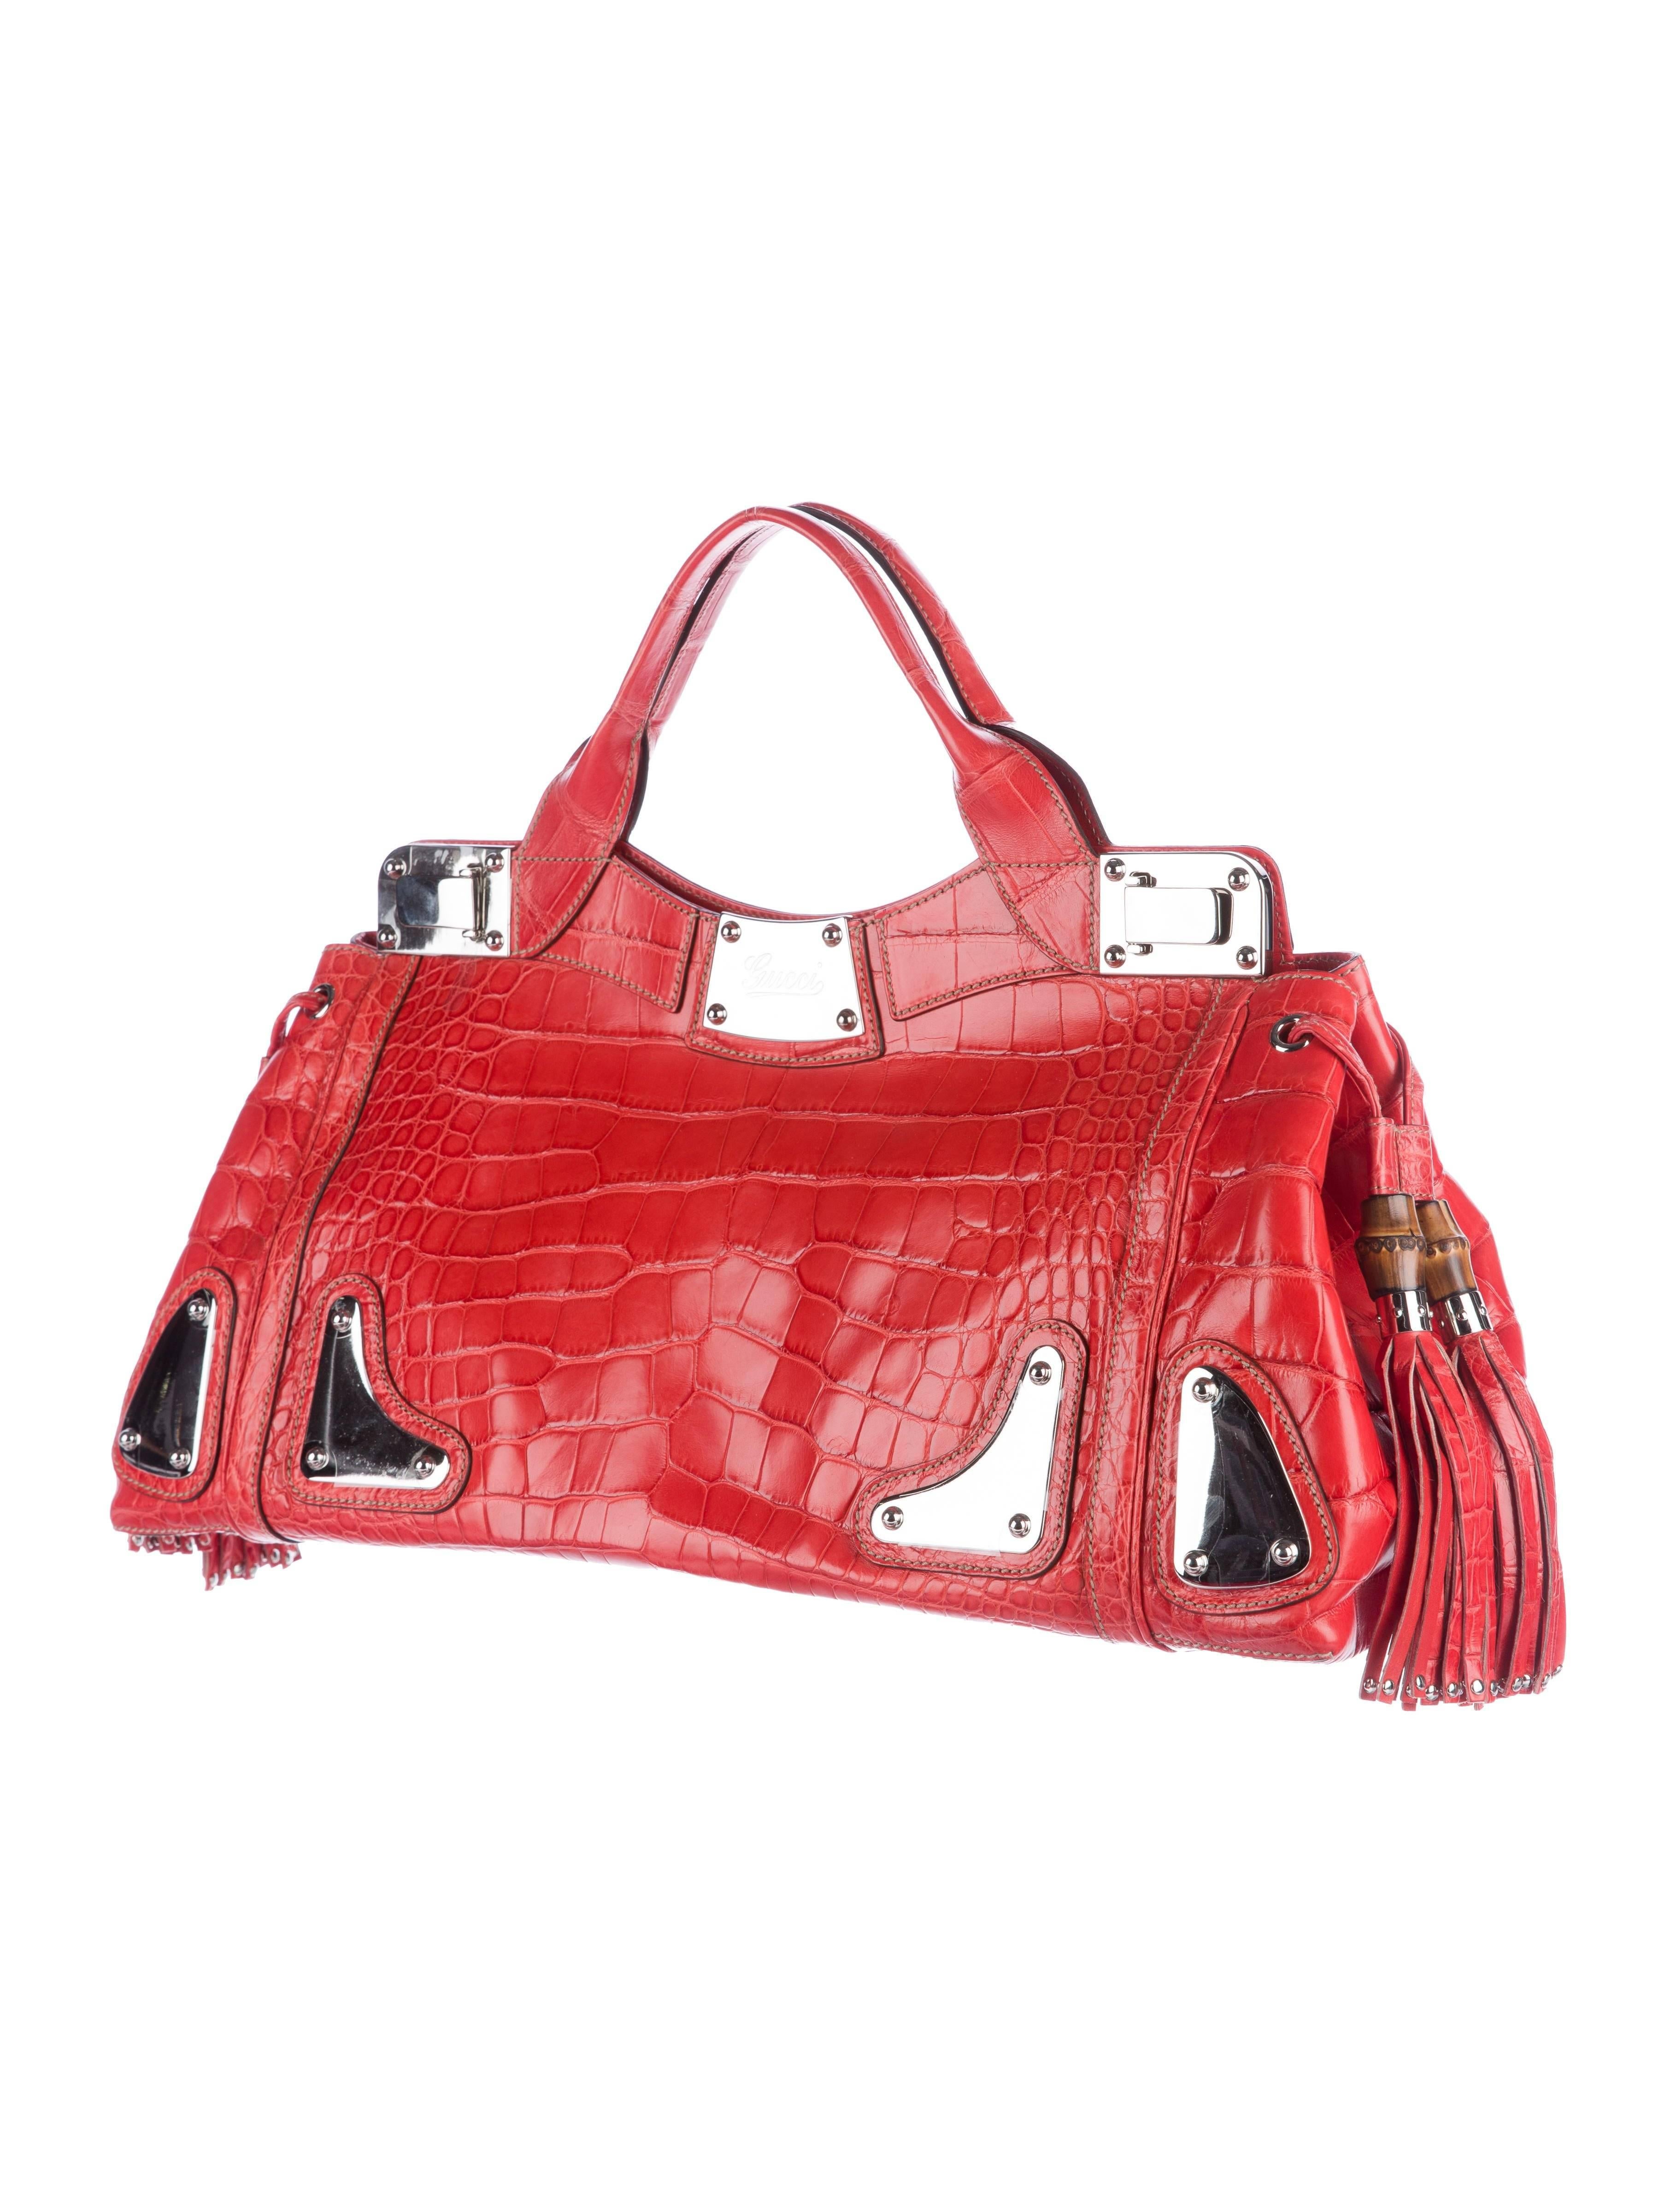 Gucci Red Black Crocodile Exotic Skin Leather Evening Top Handle Satchel Bag in Box

Original purchase price $29,995
Crocodile 
Bamboo
Silver tone hardware
Leather lining,
Flip lock closure
Made in Italy
Handle 5.5